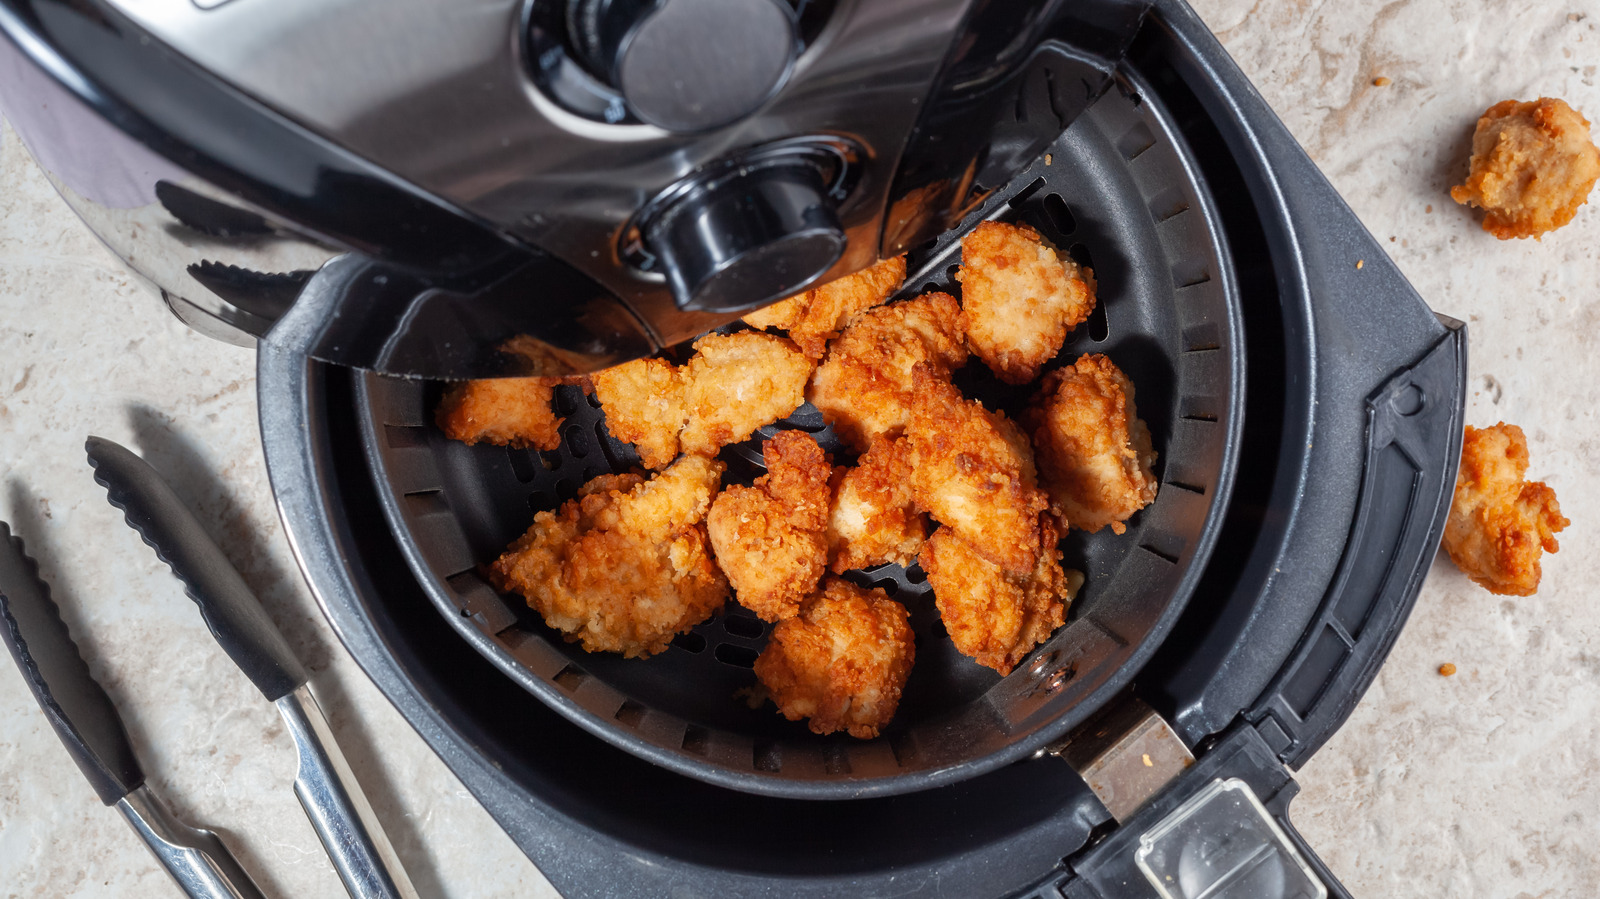 https://www.mashed.com/img/gallery/mistakes-everyone-makes-cooking-fried-chicken-in-the-air-fryer/l-intro-1644461819.jpg